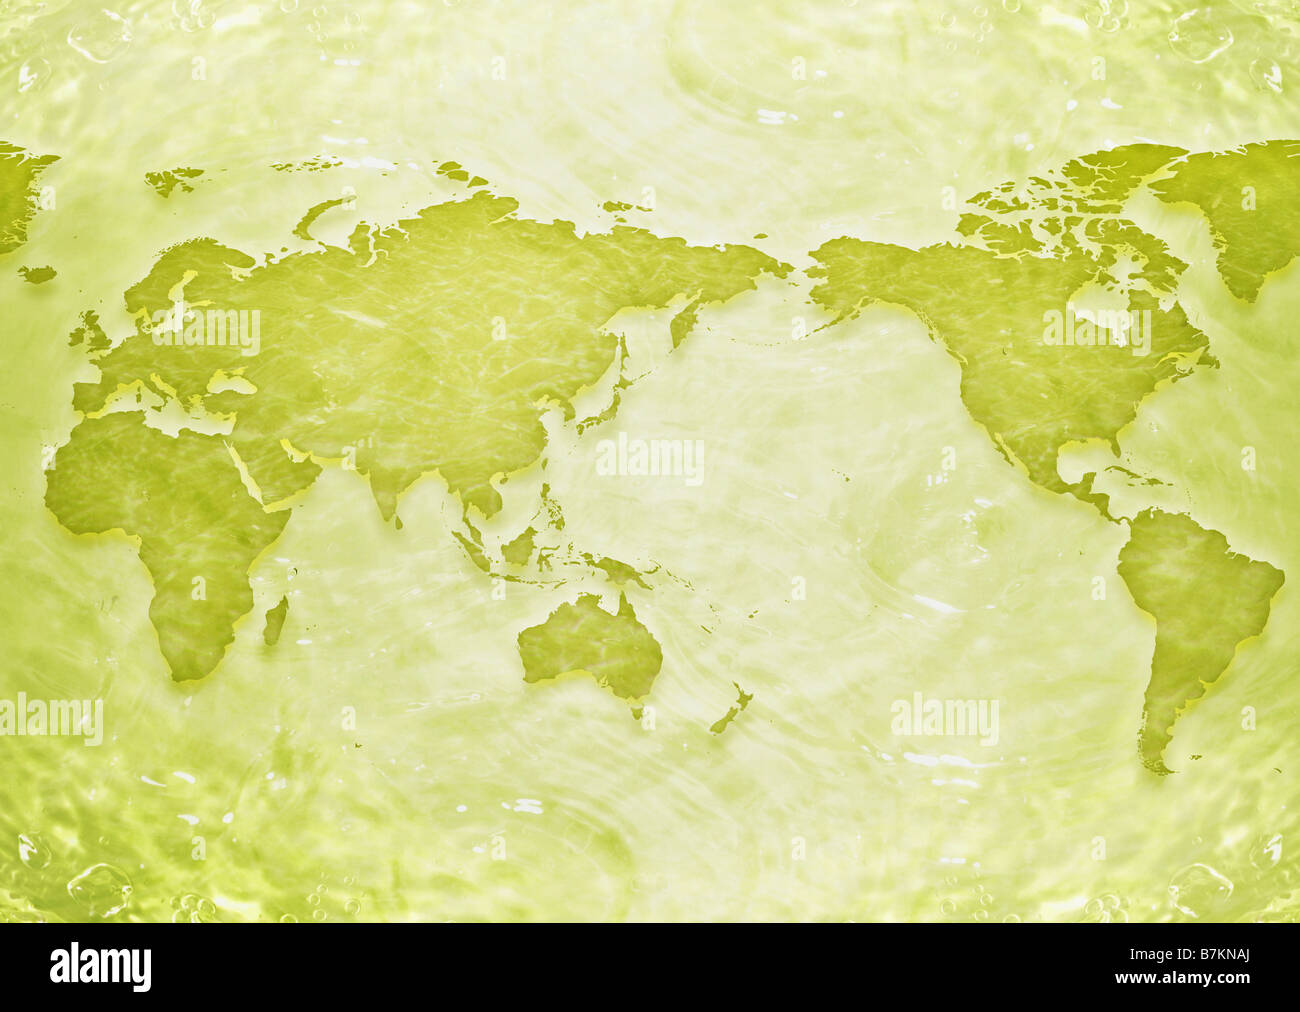 World map and water surface Stock Photo